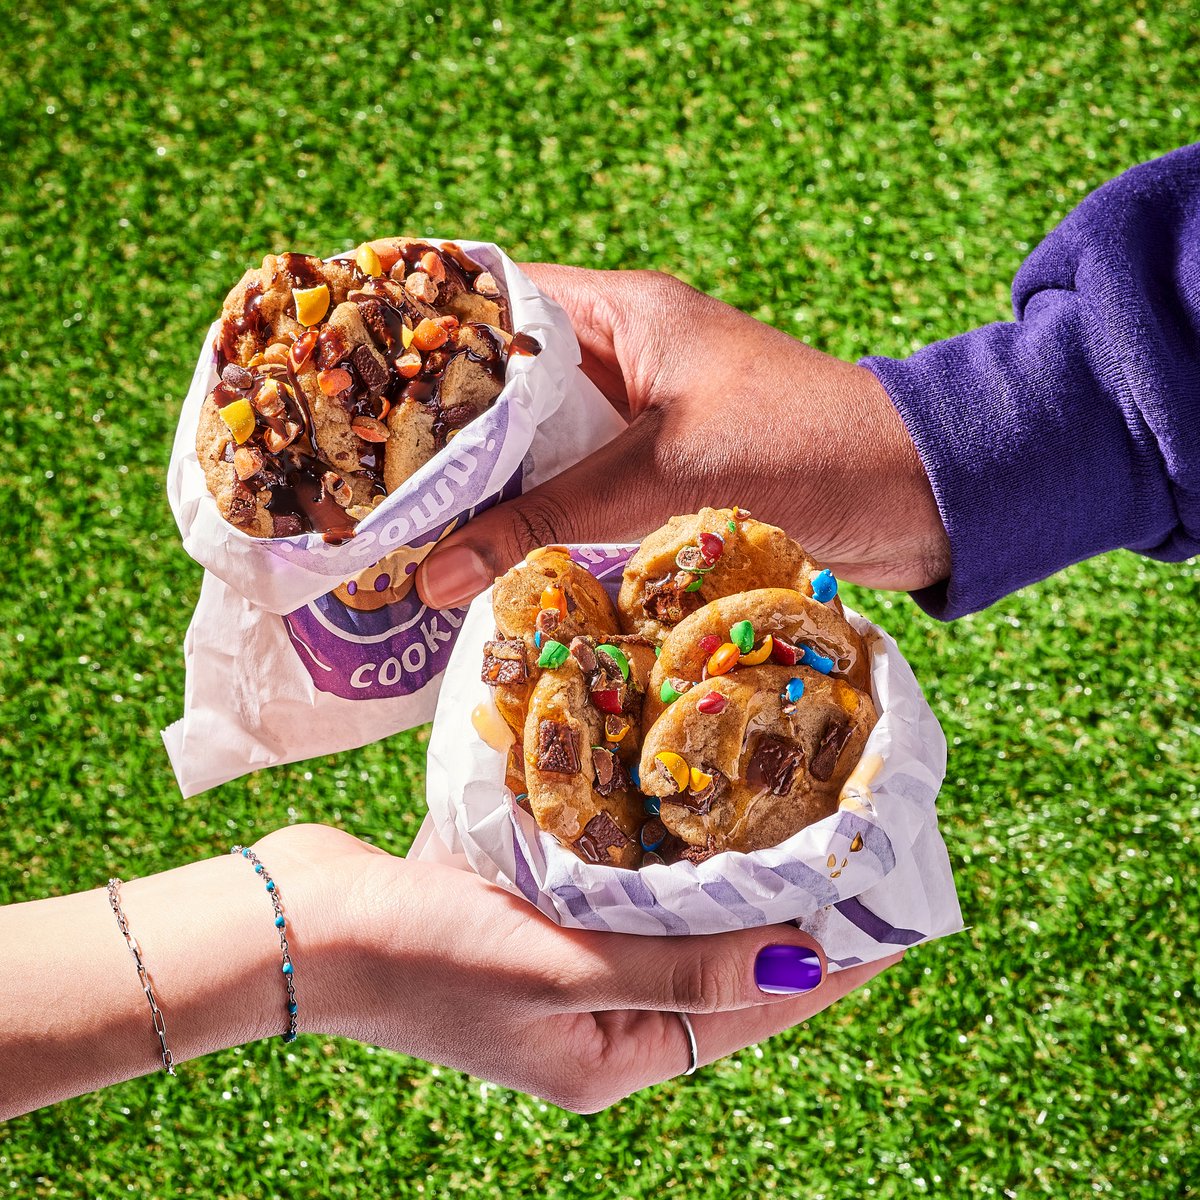 Walking Cookie Tacos are HERE! 12 mini cookies piled high in a portable package with your choice of sweet drizzle + candy topping